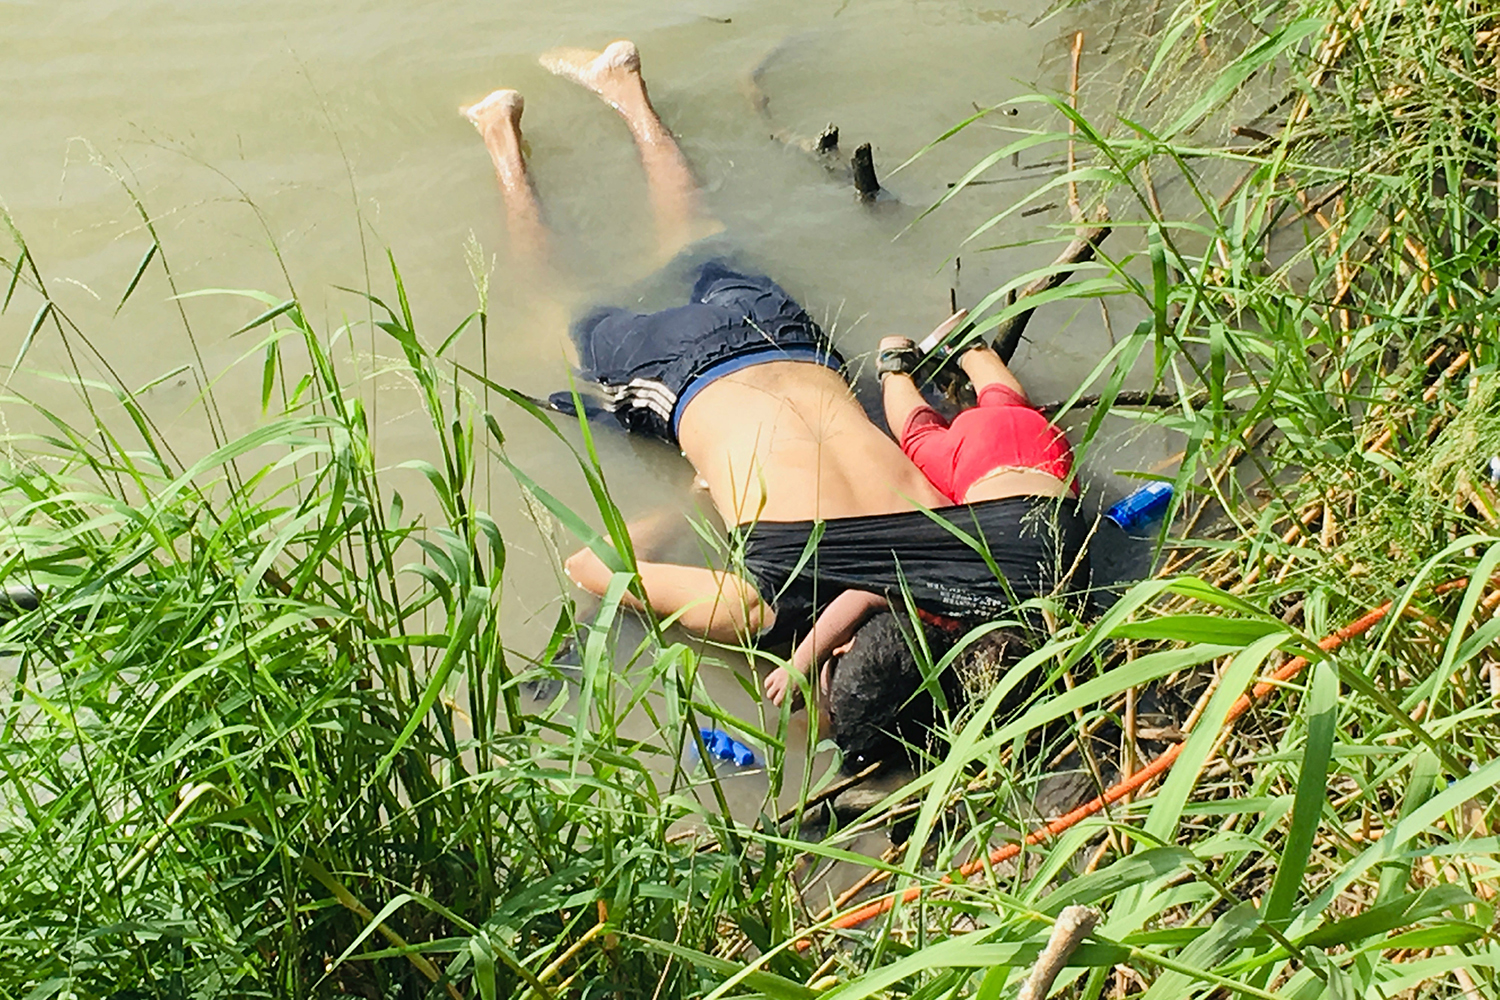 ADDS THAT PHOTO WAS FIRST PUBLISHED IN MEXICAN NEWSPAPER LA JORNADA - EDS NOTE: GRAPHIC CONTENT - The bodies of Salvadoran migrant Oscar Alberto Martínez Ramírez and his nearly 2-year-old daughter Valeria lie on the bank of the Rio Grande in Matamoros, Mexico, Monday, June 24, 2019, after they drowned trying to cross the river to Brownsville, Texas. Martinez' wife, Tania told Mexican authorities she watched her husband and child disappear in the strong current. This photograph was first published in the Mexican newspaper La Jornada. (AP Photo/Julia Le Duc)